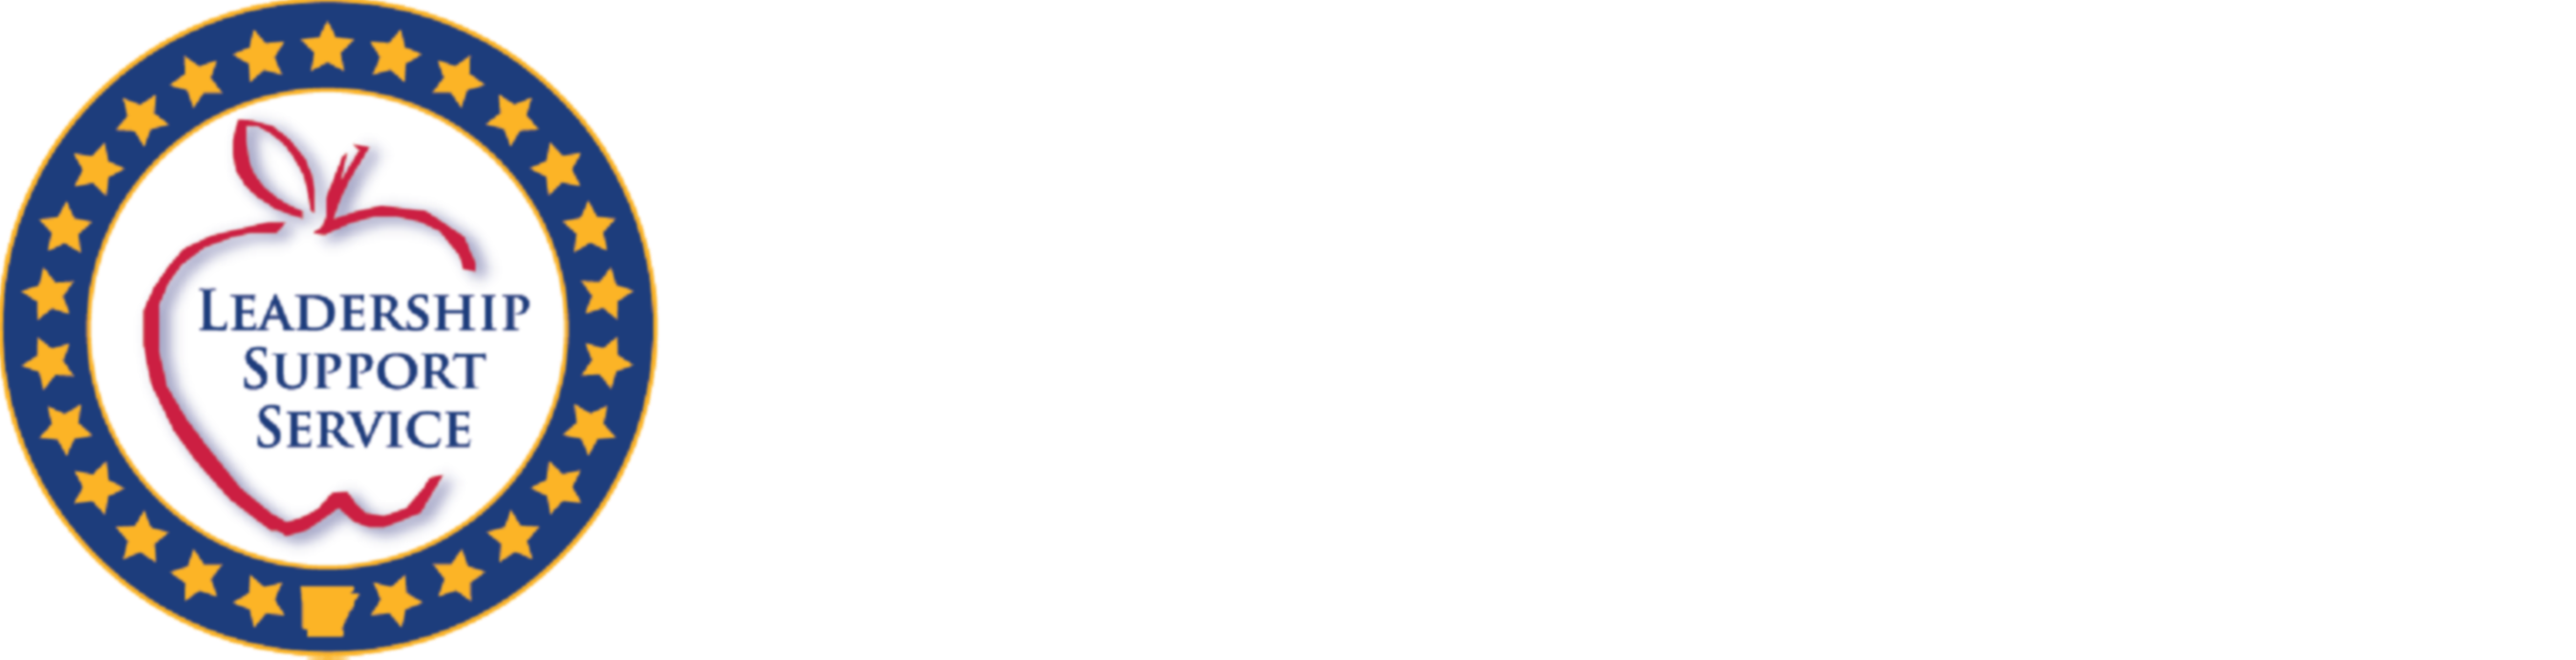 Arkansas Dept of Education State Required Information